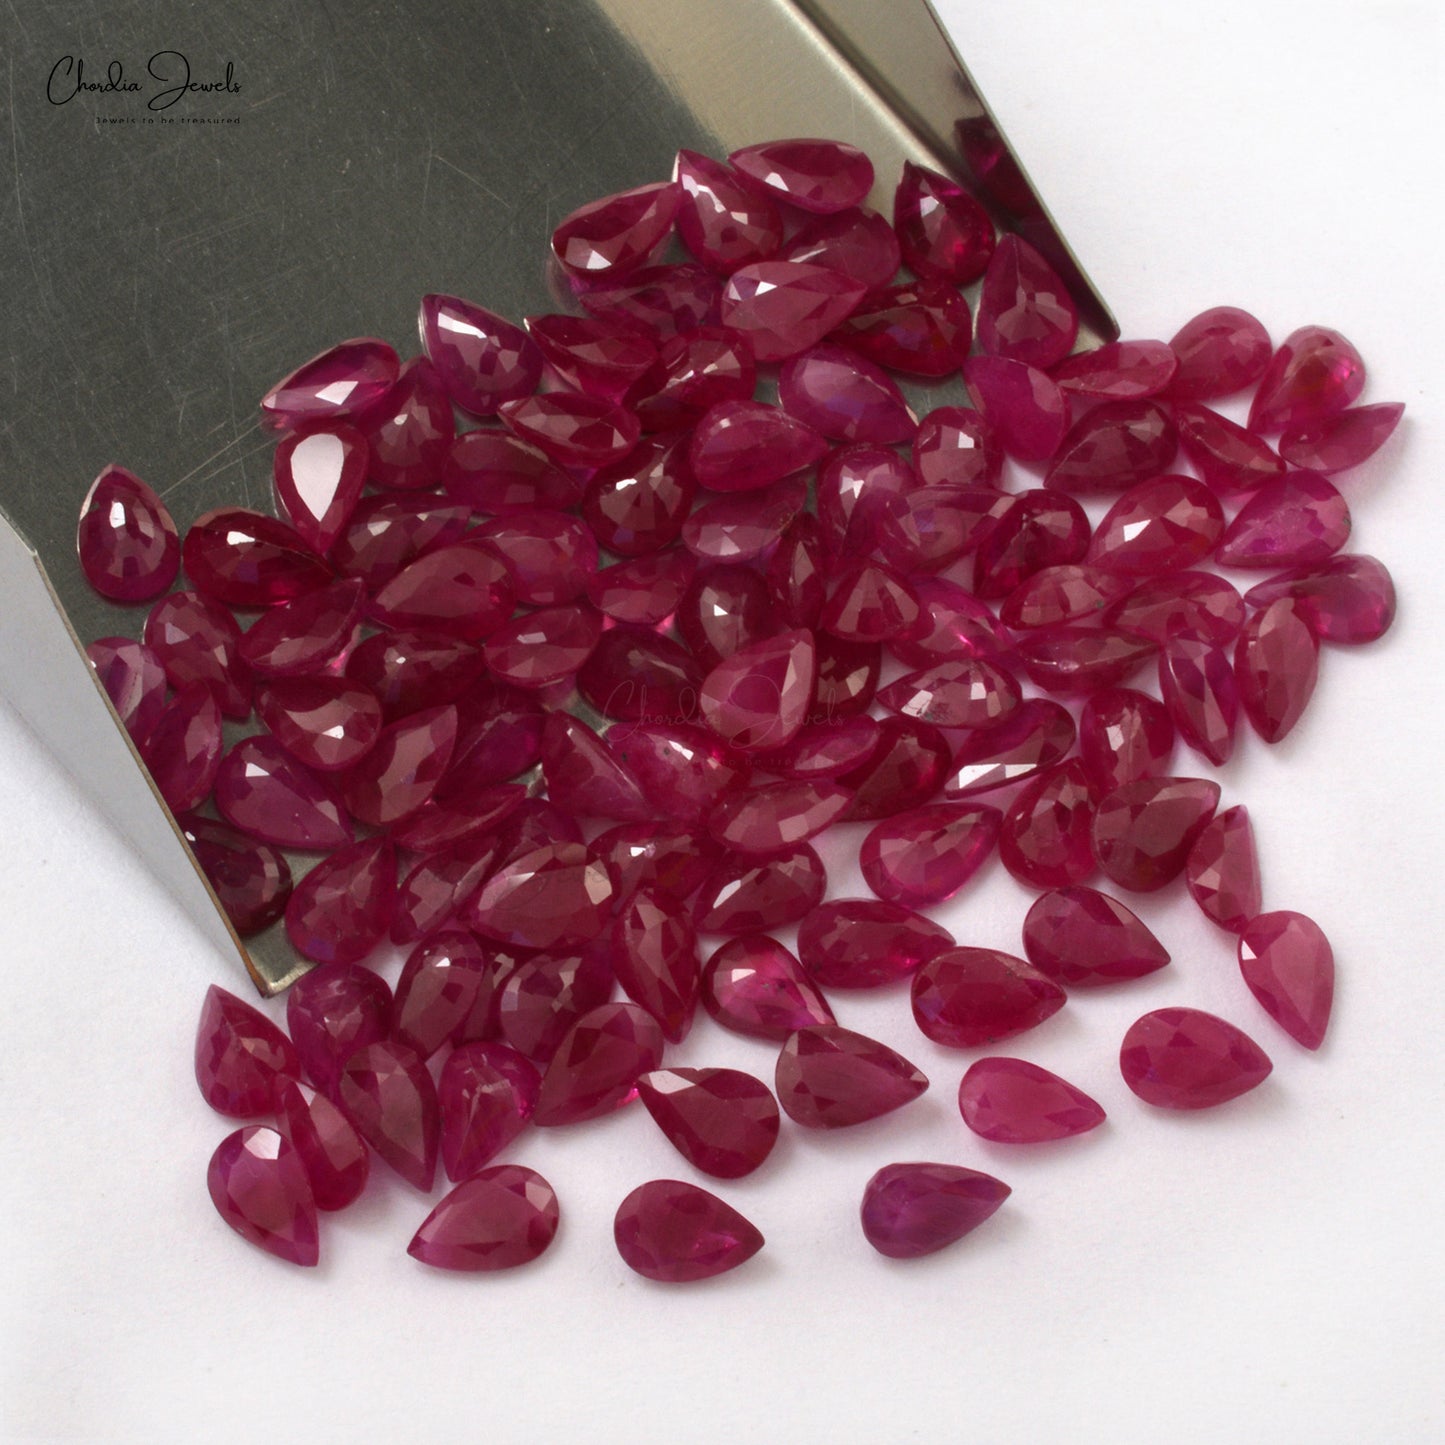 High Quality Loose Genuine Ruby Faceted Pear 8x6mm, 1 Piece